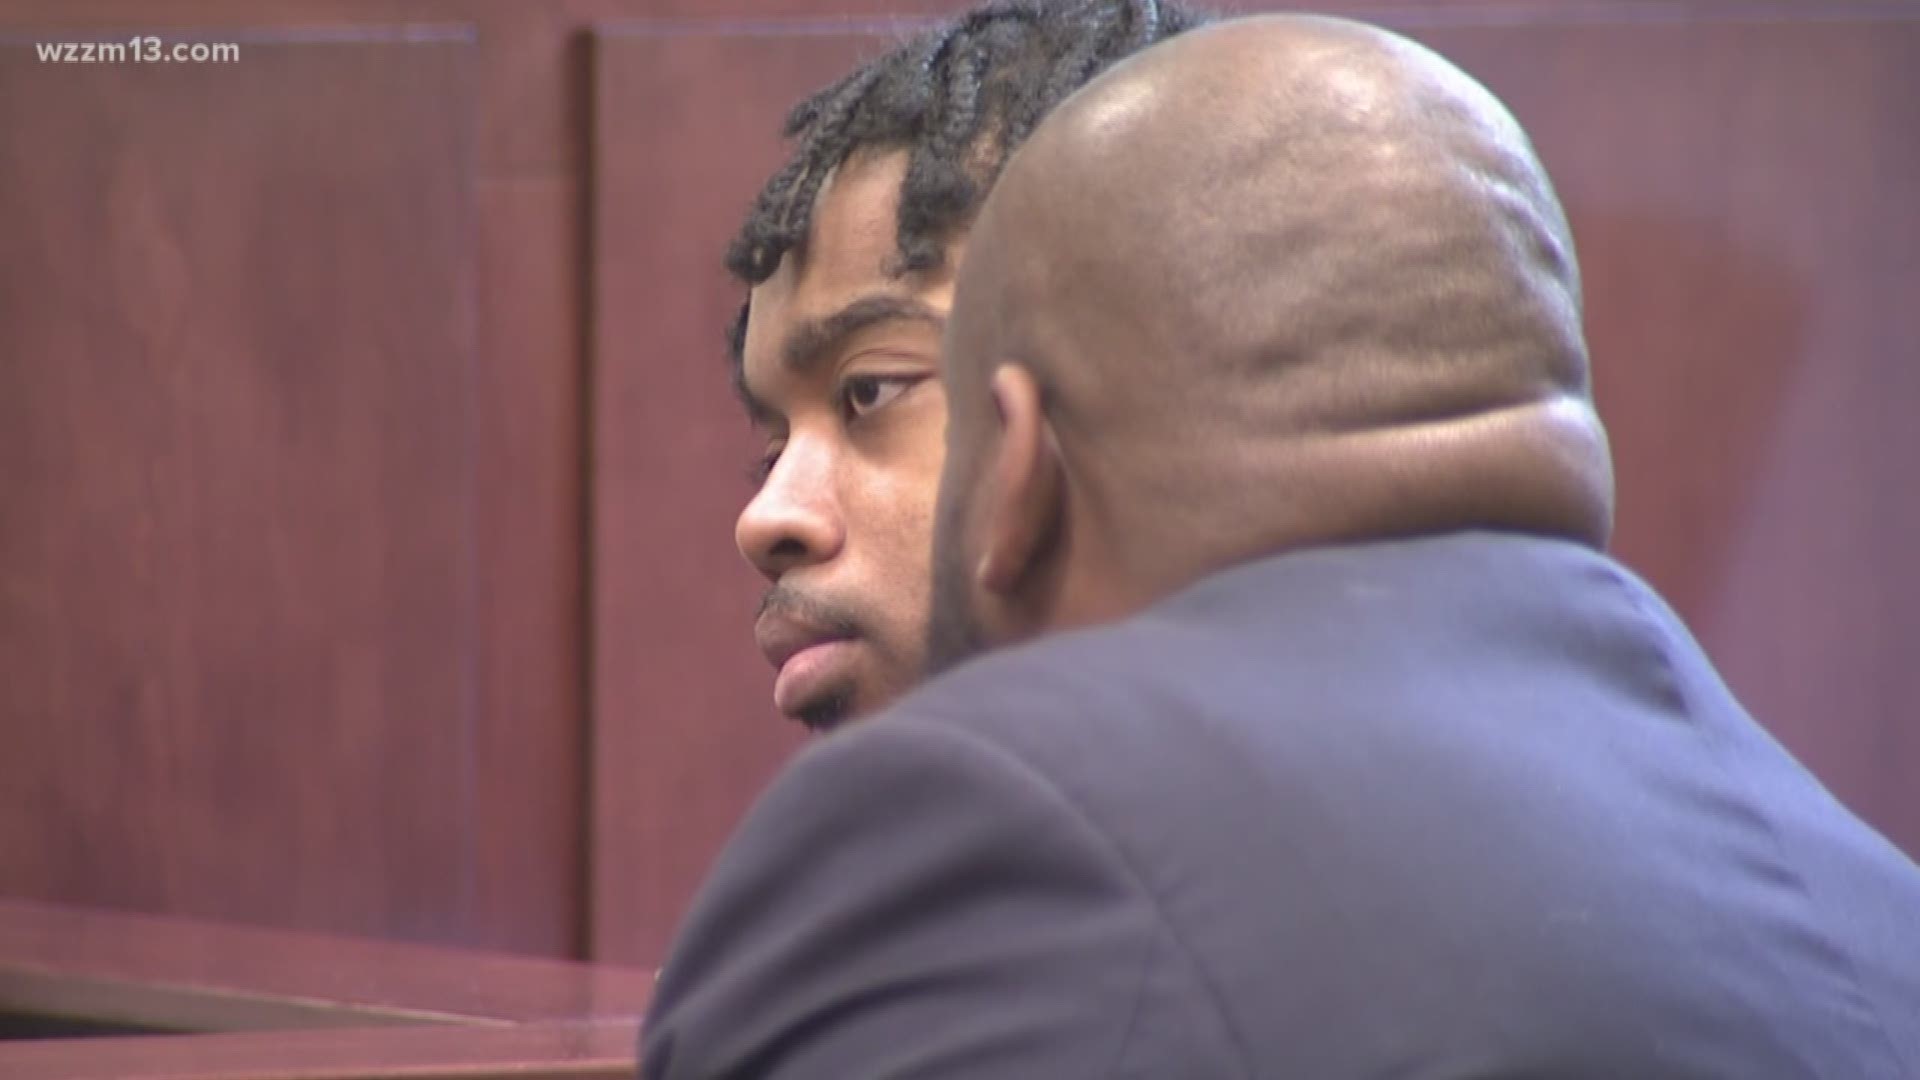 Masson Bryant has been in court a number of times on the open murder charge for the death of Nathan Ward.